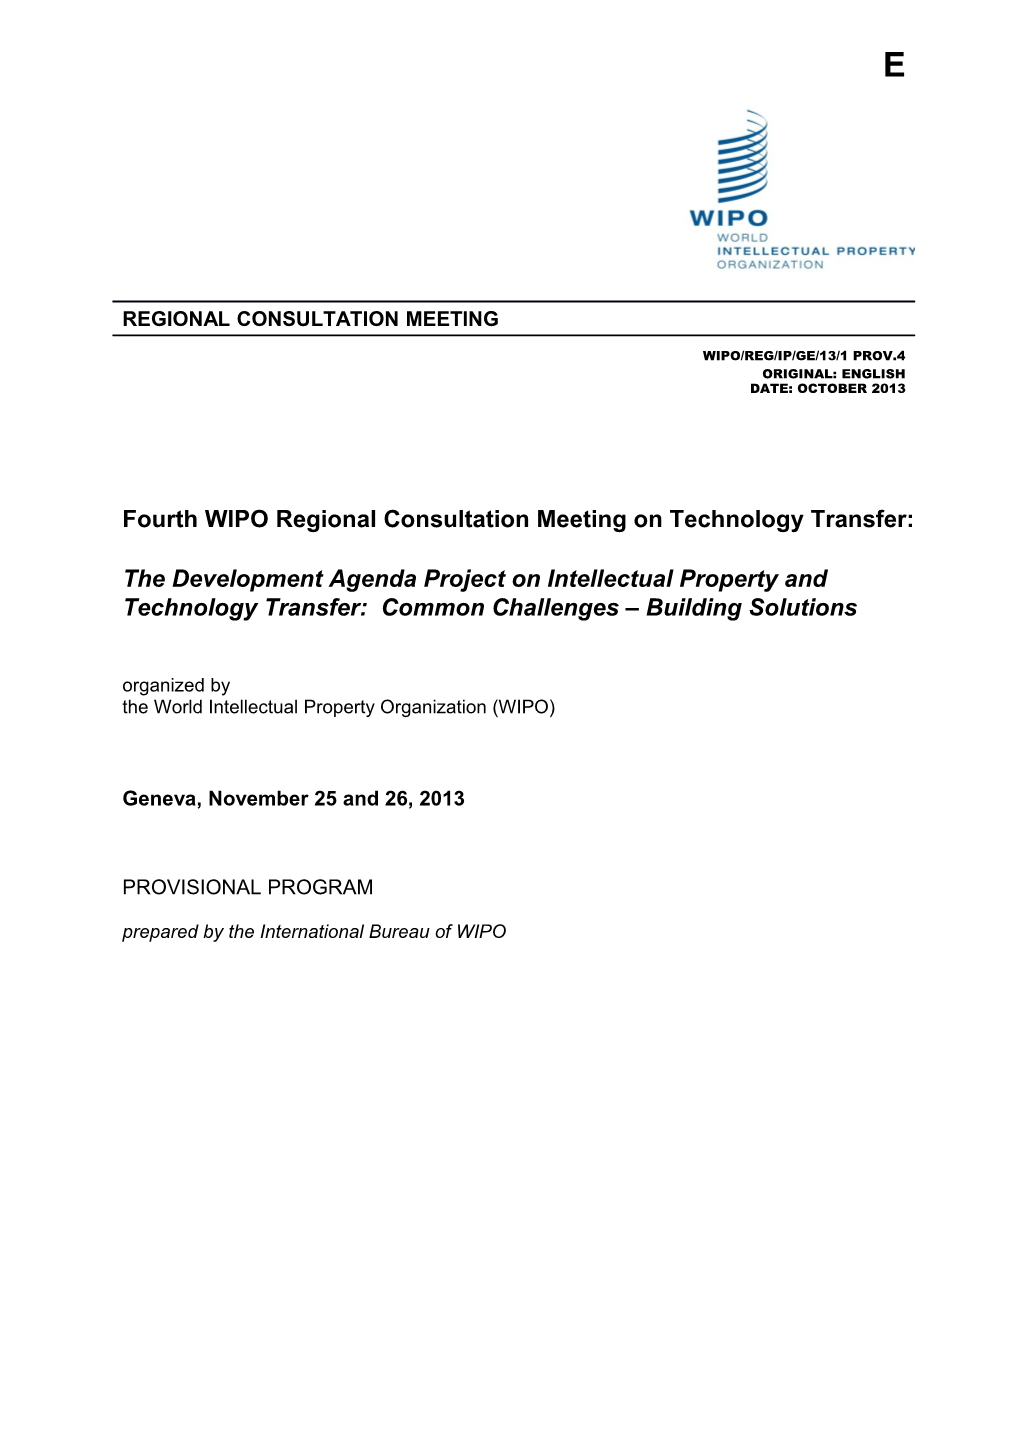 Fourth WIPO Regional Consultation Meeting on Technology Transfer